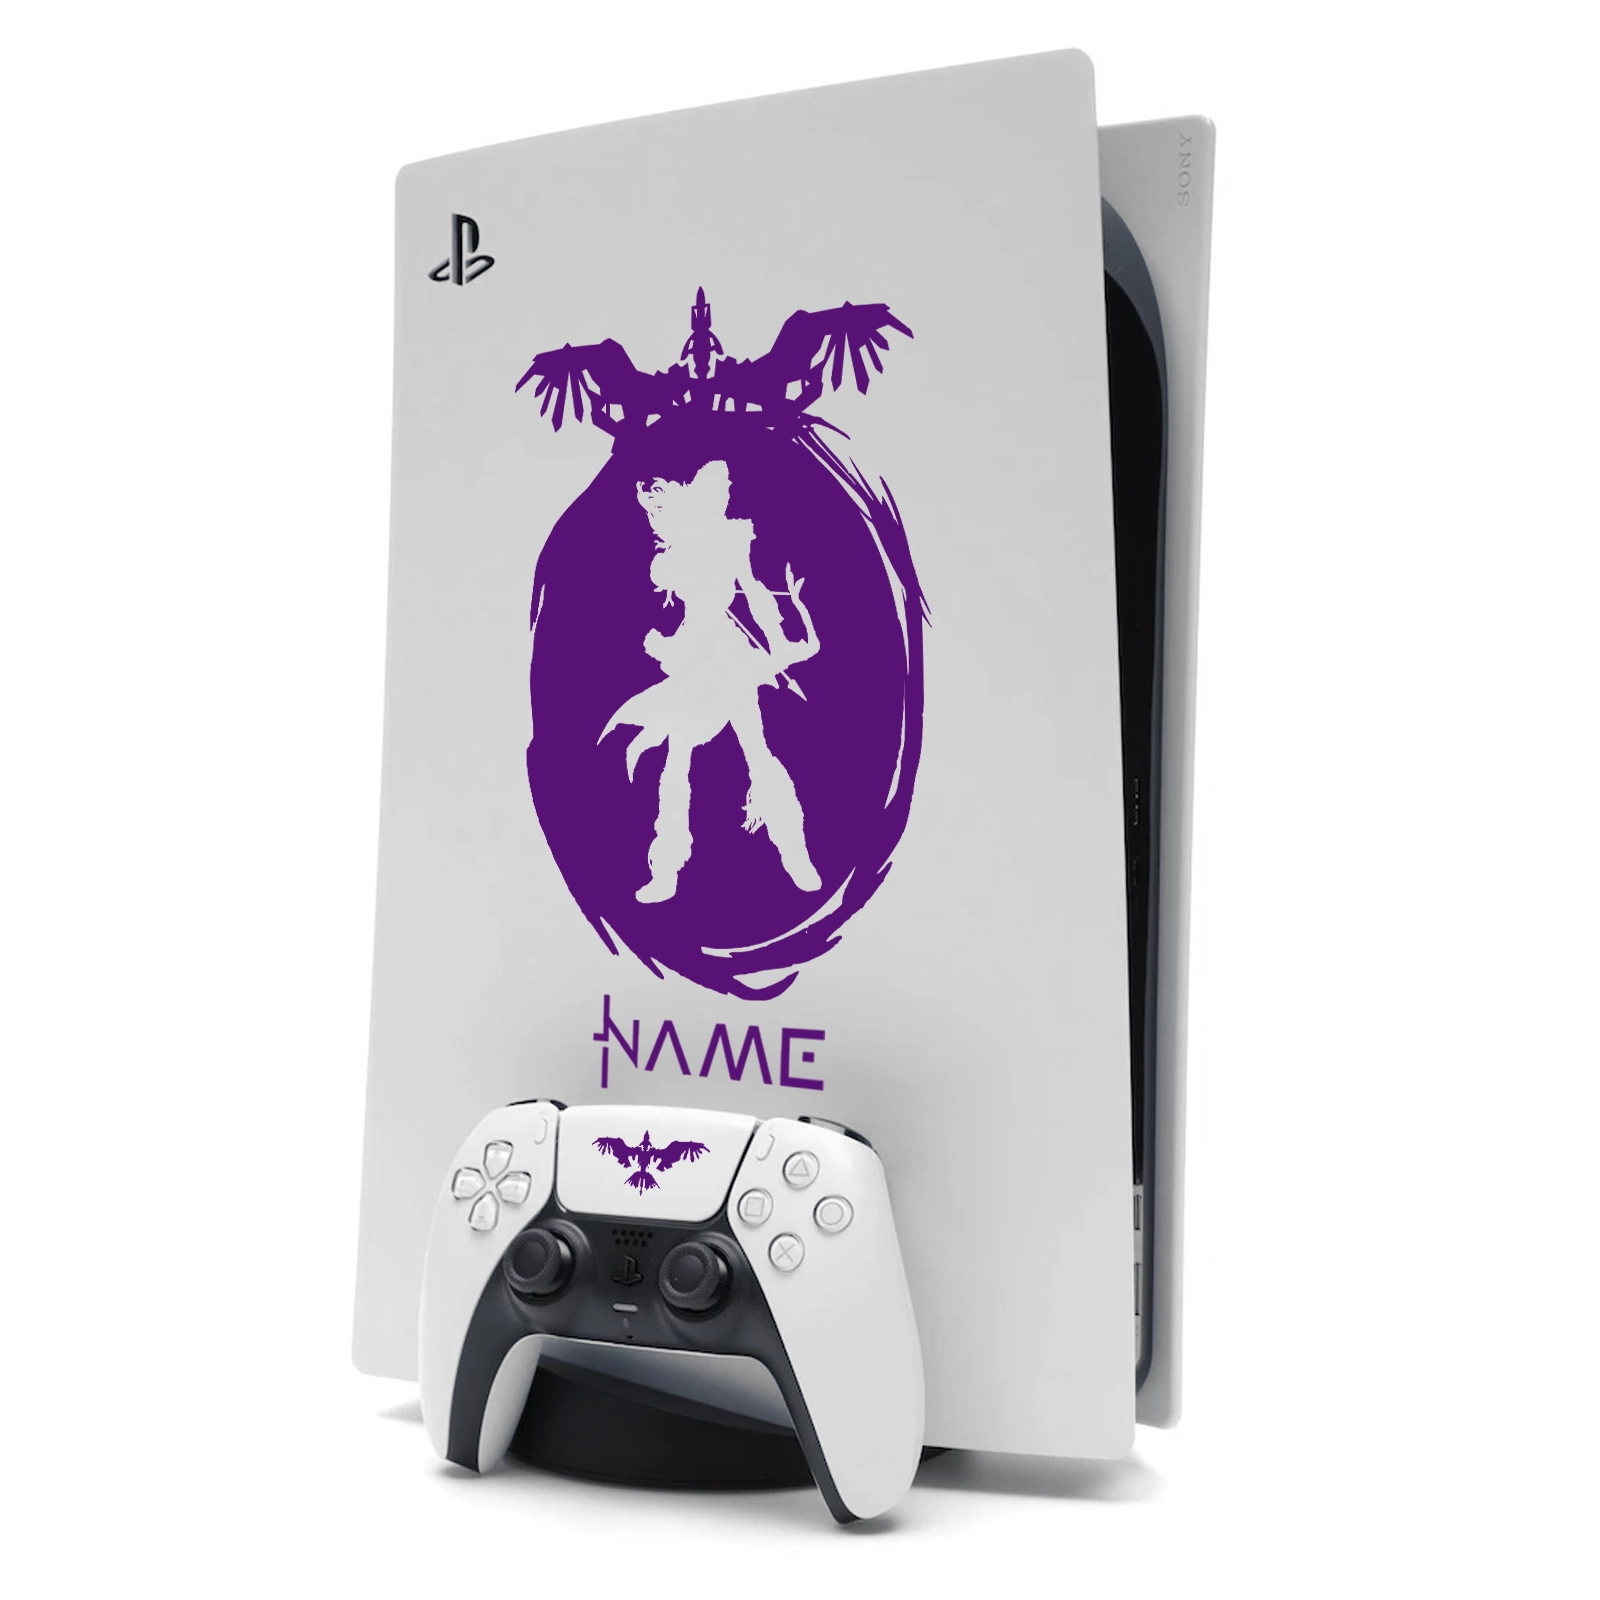 Horizon Aloy PS5 Sticker Skin for Playstation 5 in Purple